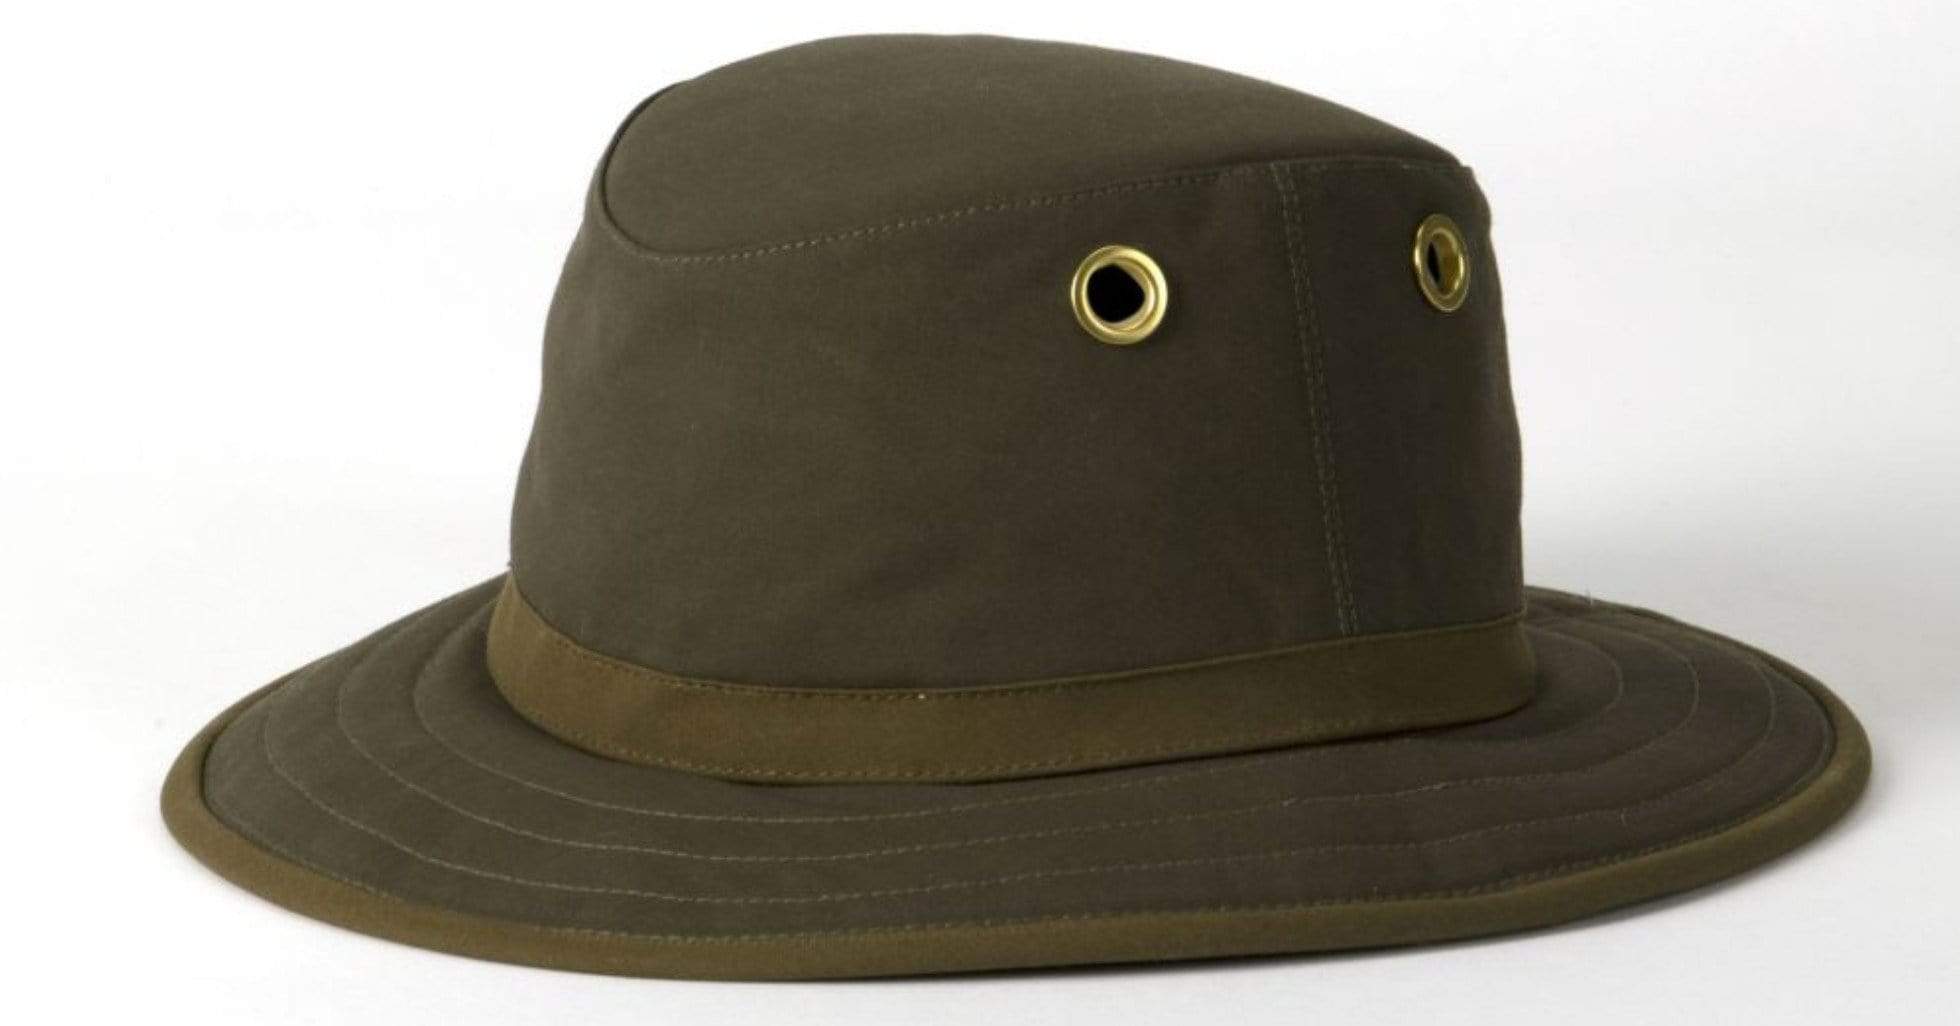 Tilley Hats 57 cm (7 1/8) / Green Tilley Outback Waxed Cotton Hat TWC7